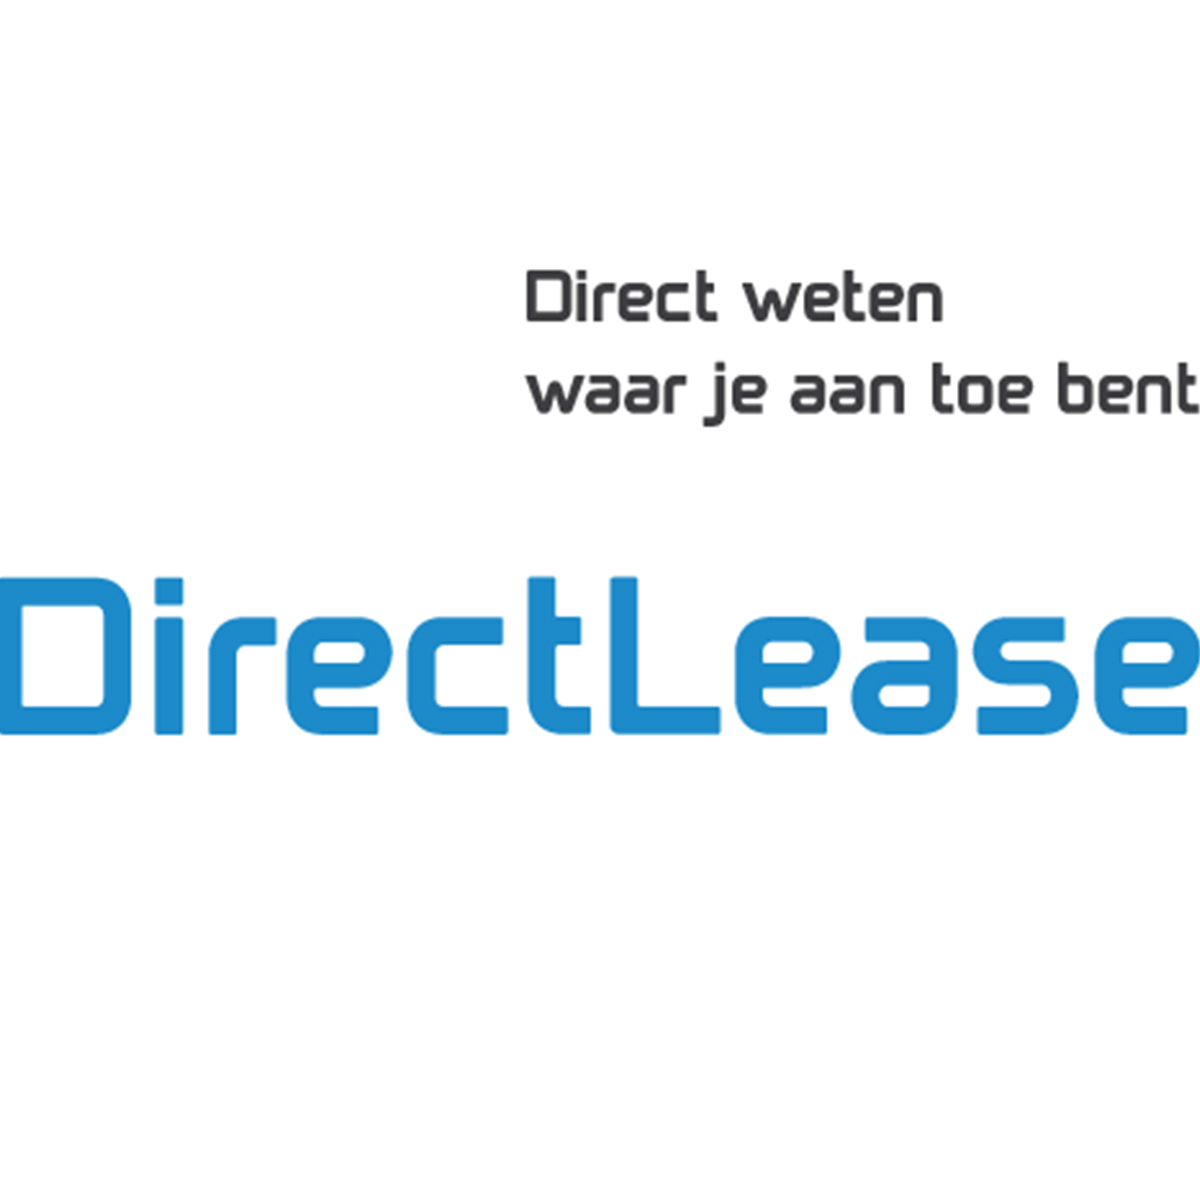 Lease Logo - Private Lease van DirectLease Reviews. Read Customer Service